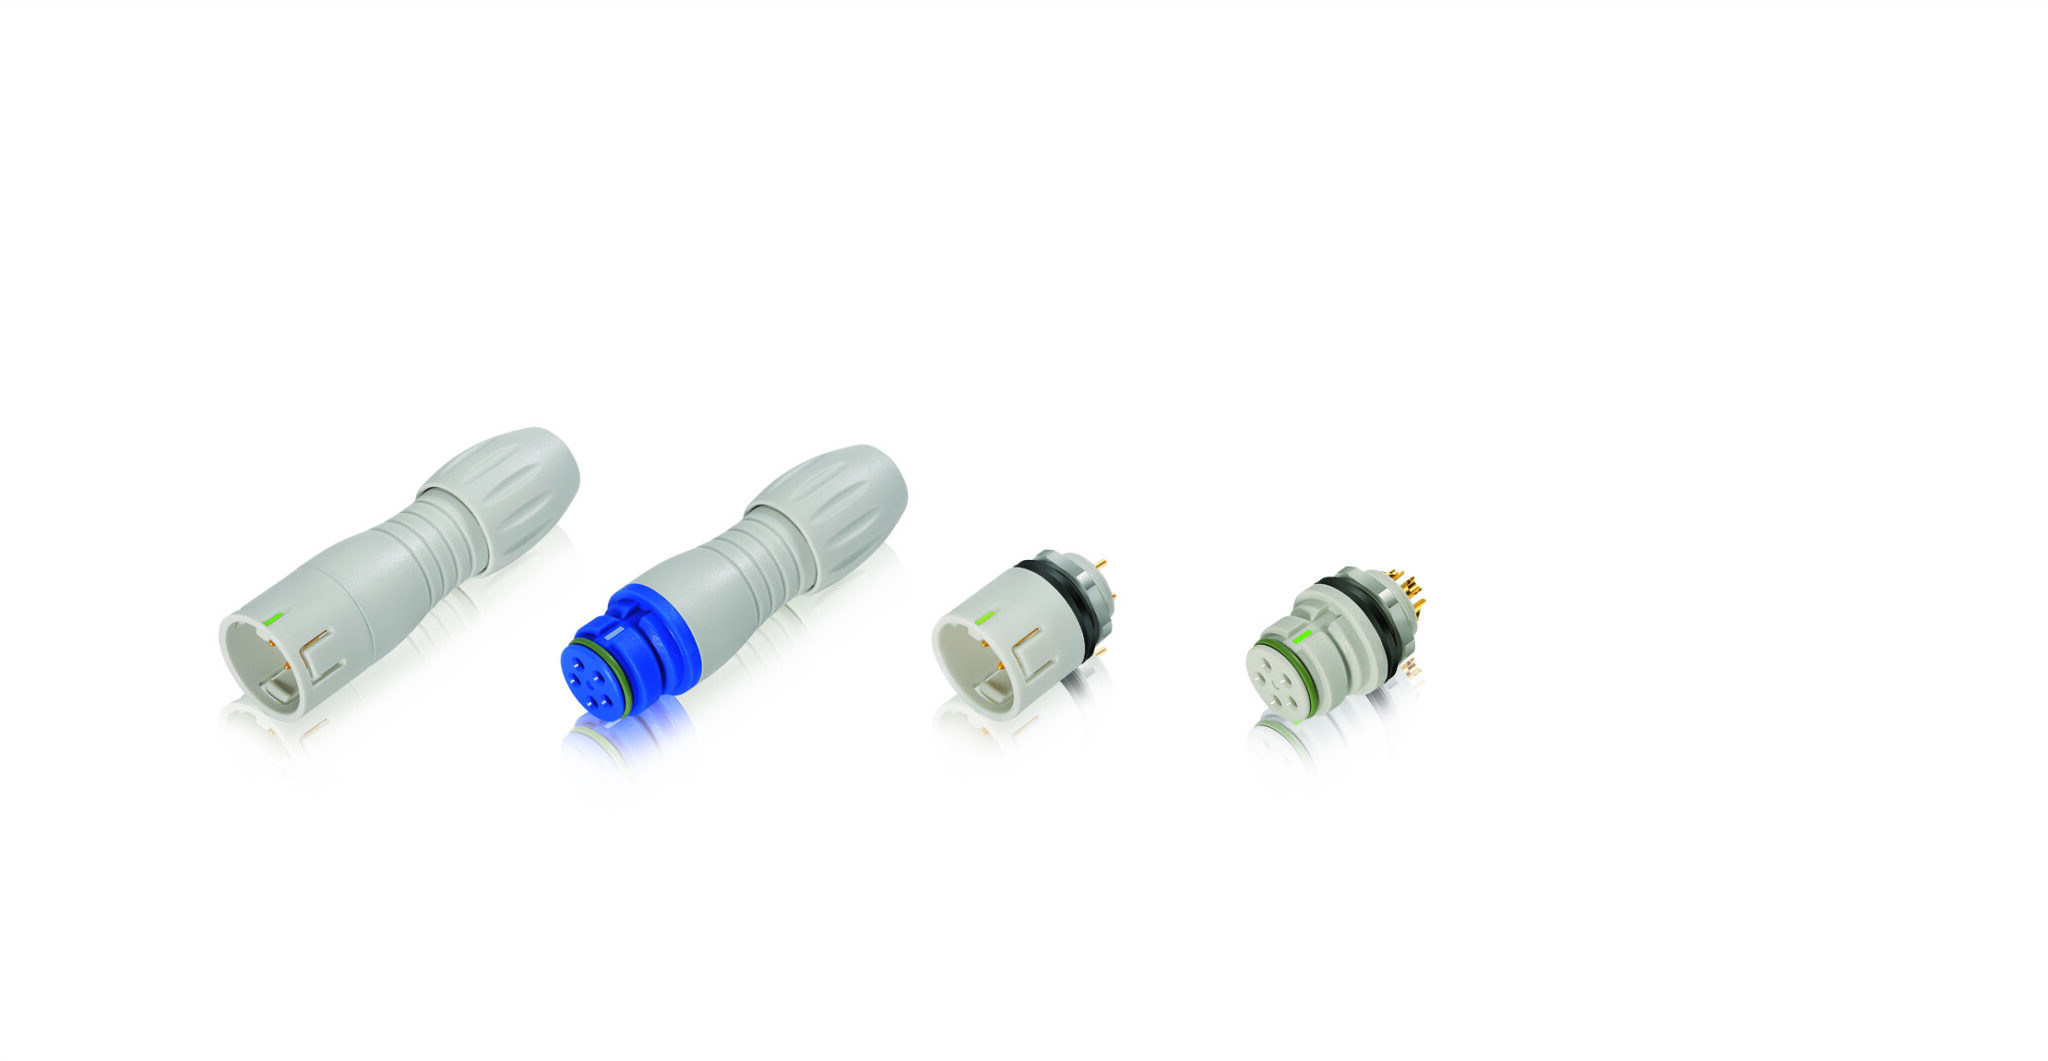 Binder 720 Series miniature circular medical-specific connectors from CDM Electronics